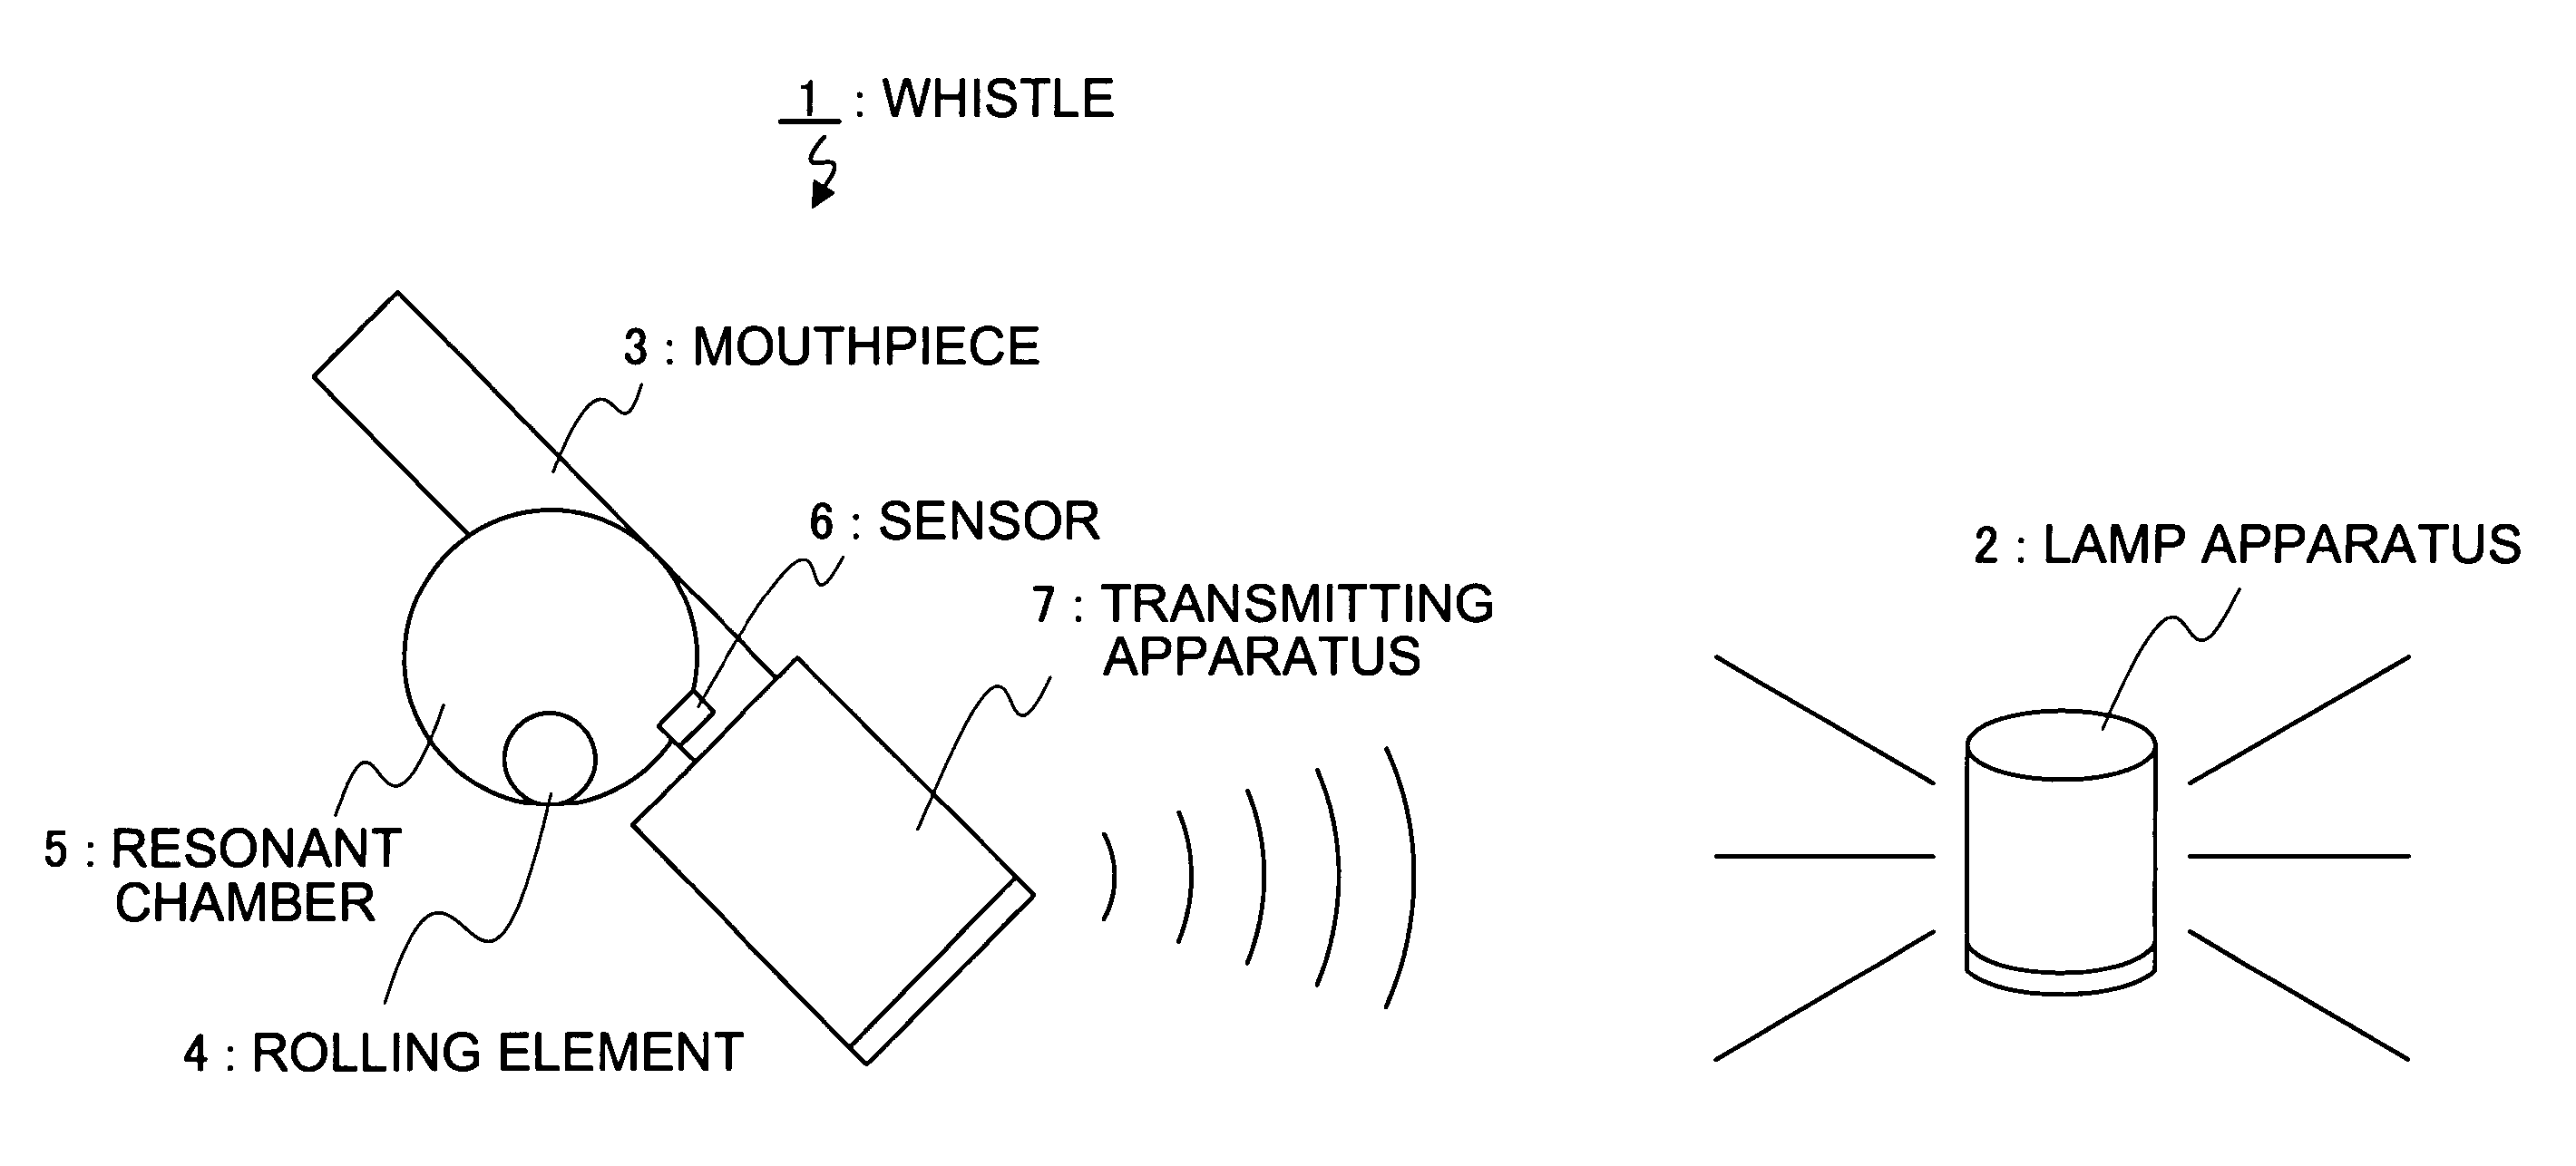 Whistle and whistle notification device